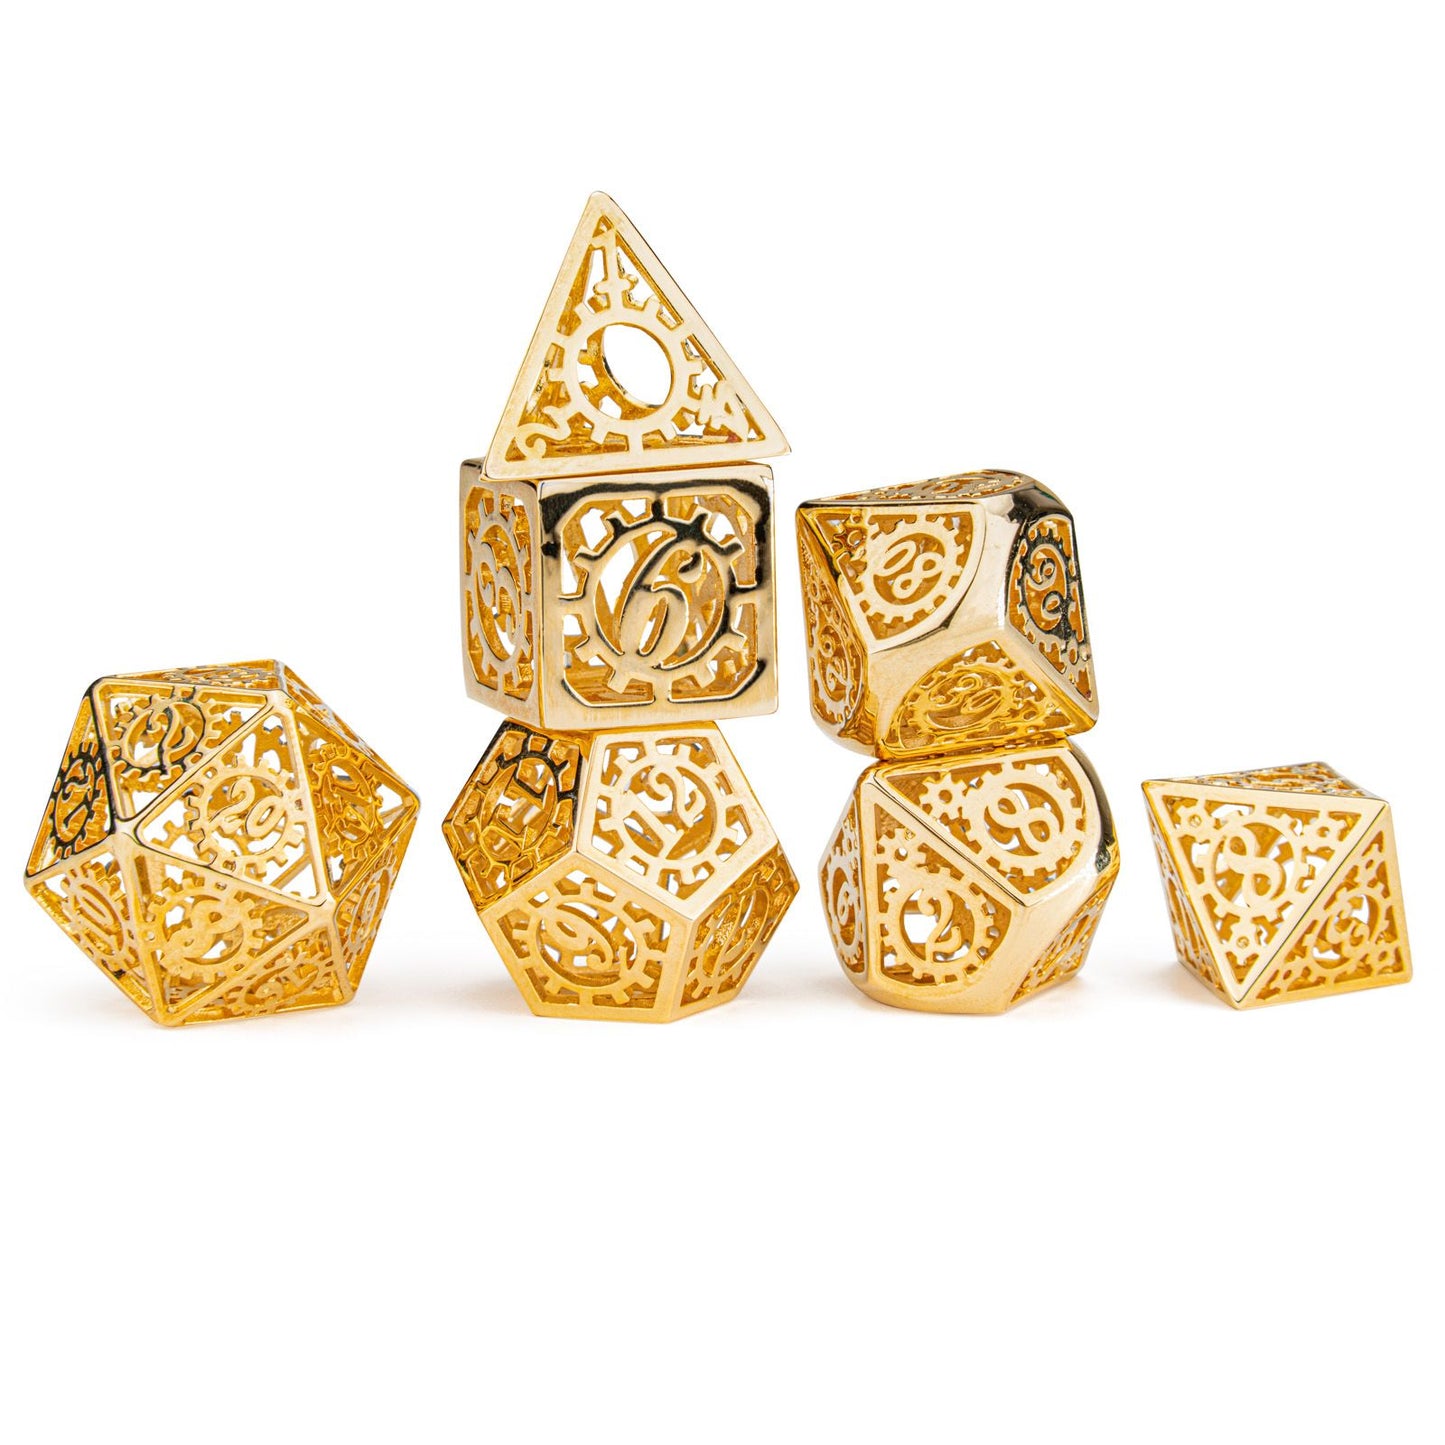 Shiny gold Hollow Out Steampunk Dice cage gear design